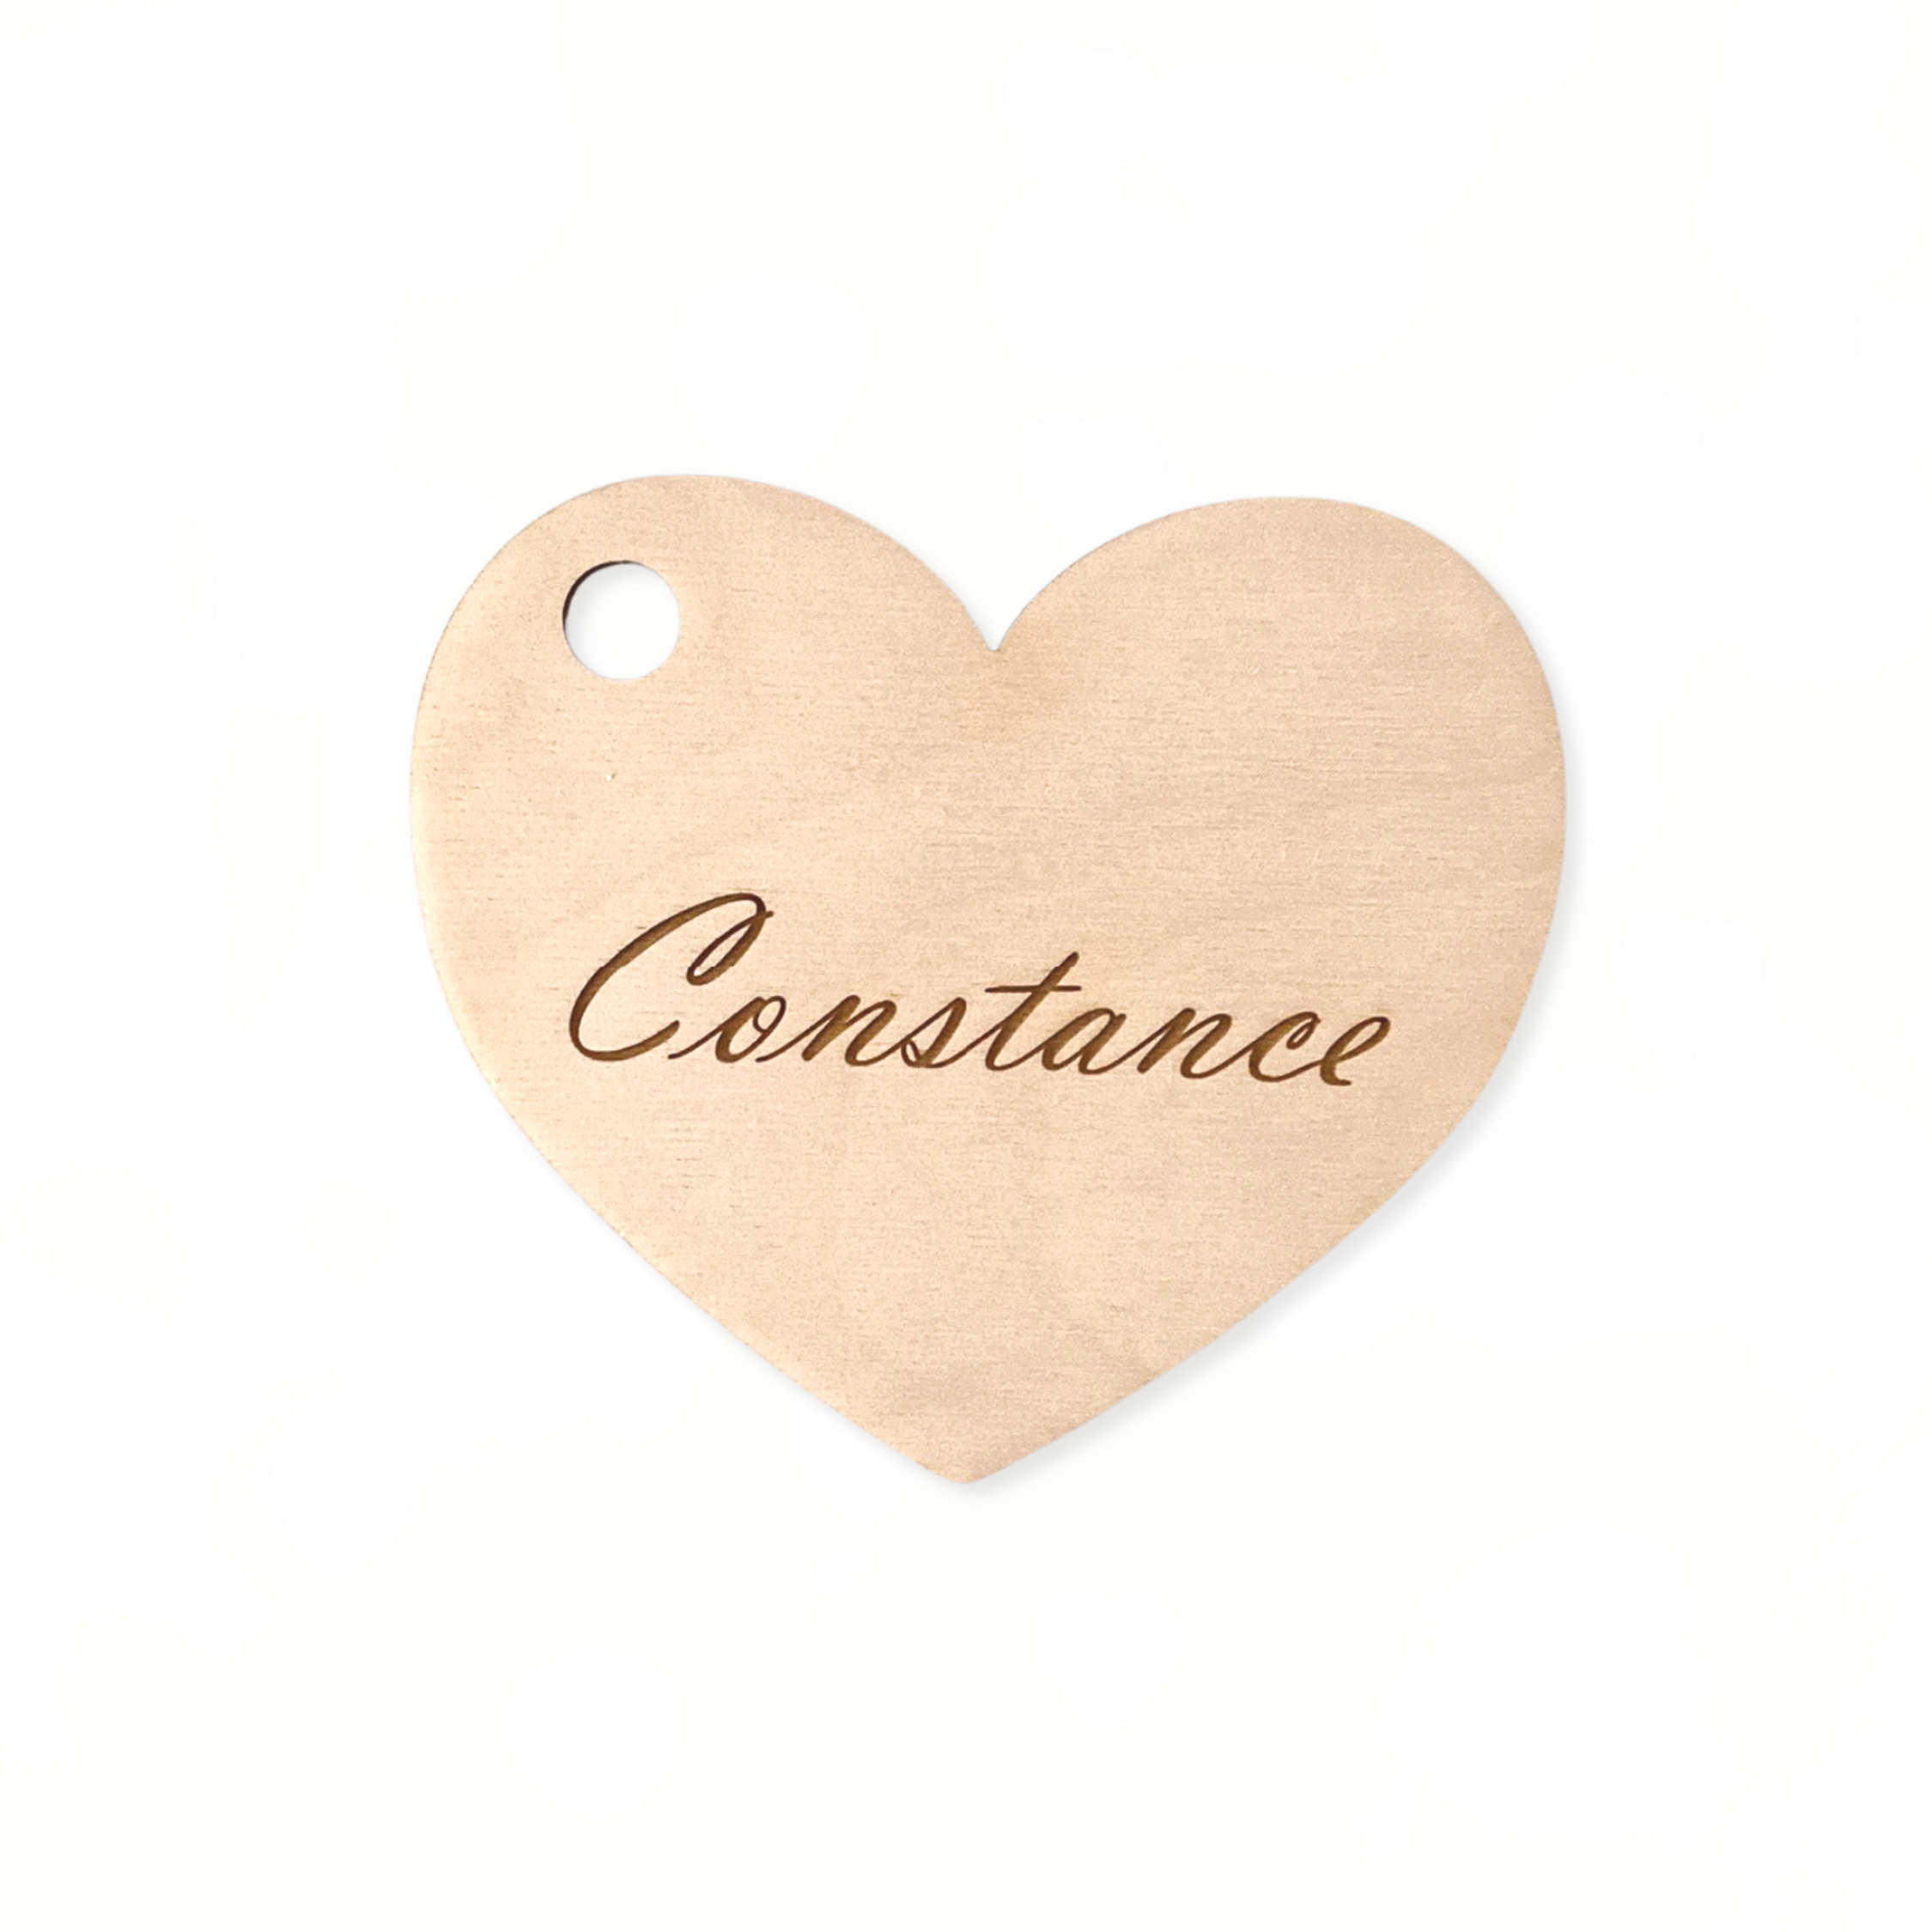 Personalized heart shaped label